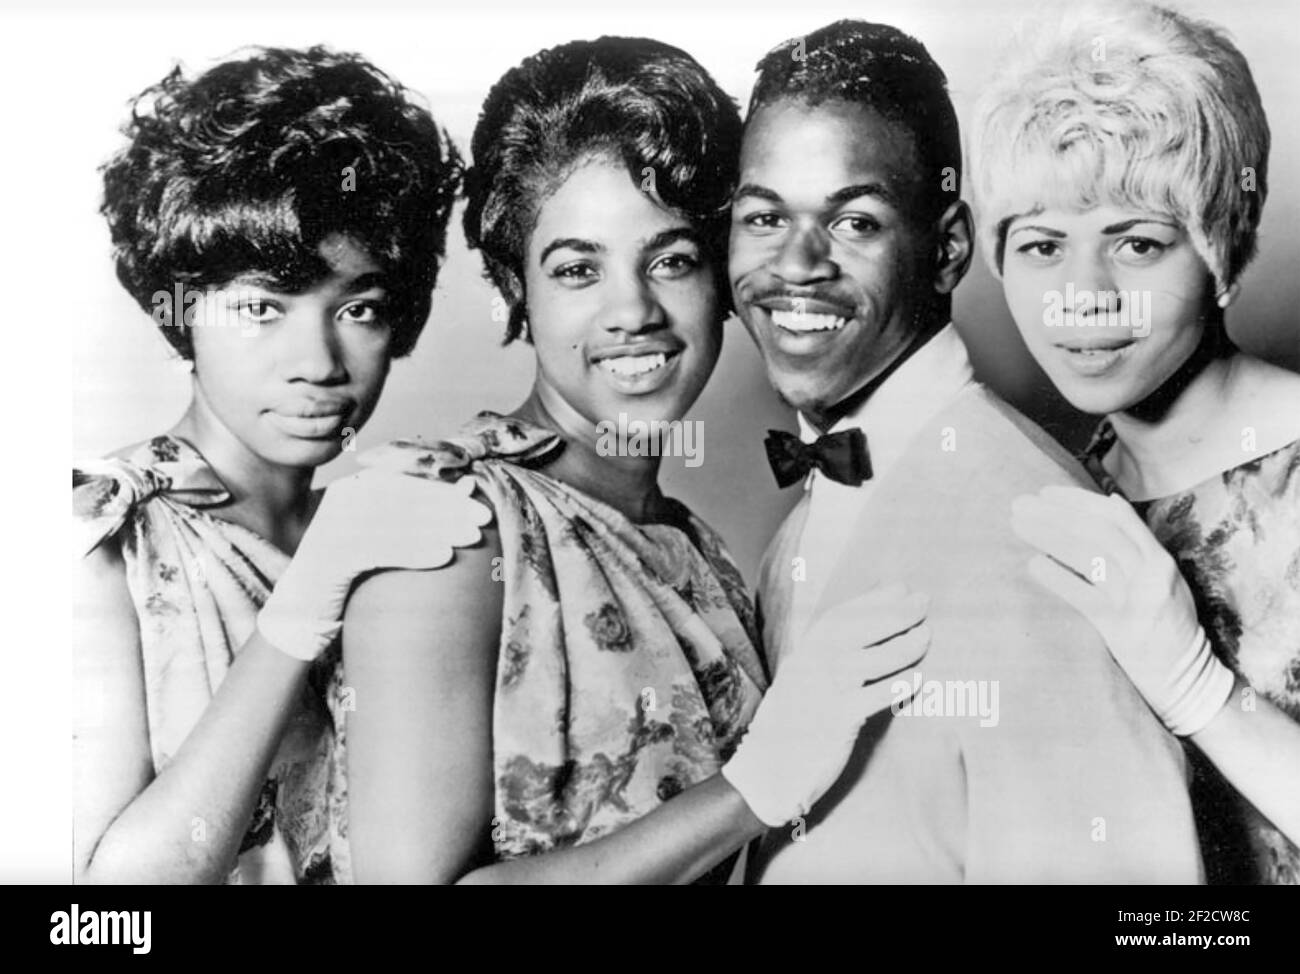 THE ORLONS Promotional photo of American R&B group about 1963 with Stephen Caldwell second from right Stock Photo